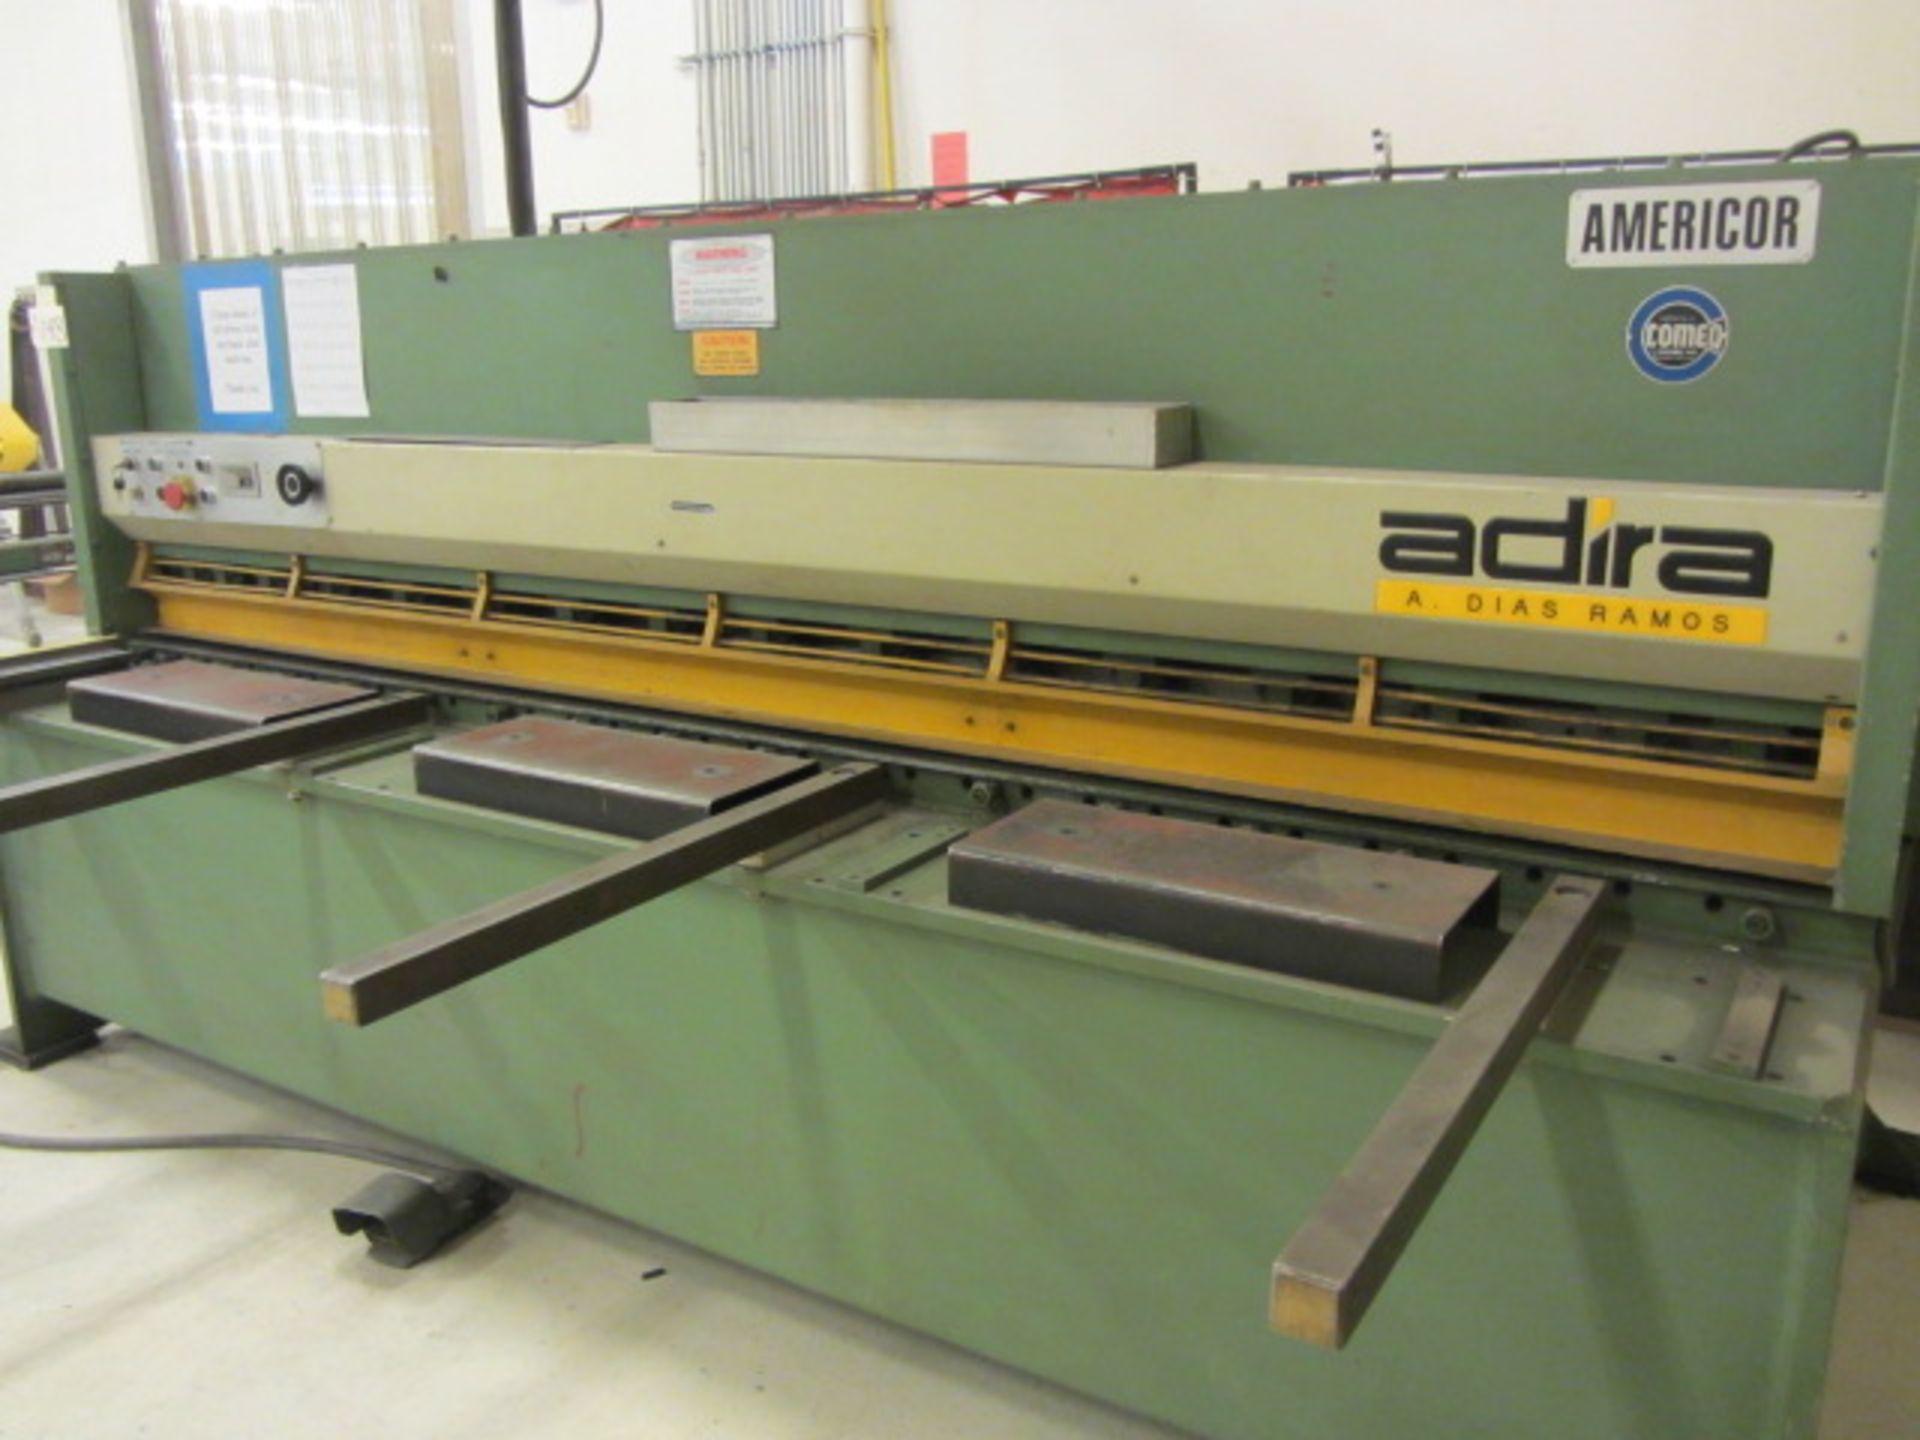 Adira 10' x 1/4'' Hydraulic Squaring Shear GHS-0630 with Rake & Clearance Adjustments, Front - Image 4 of 11